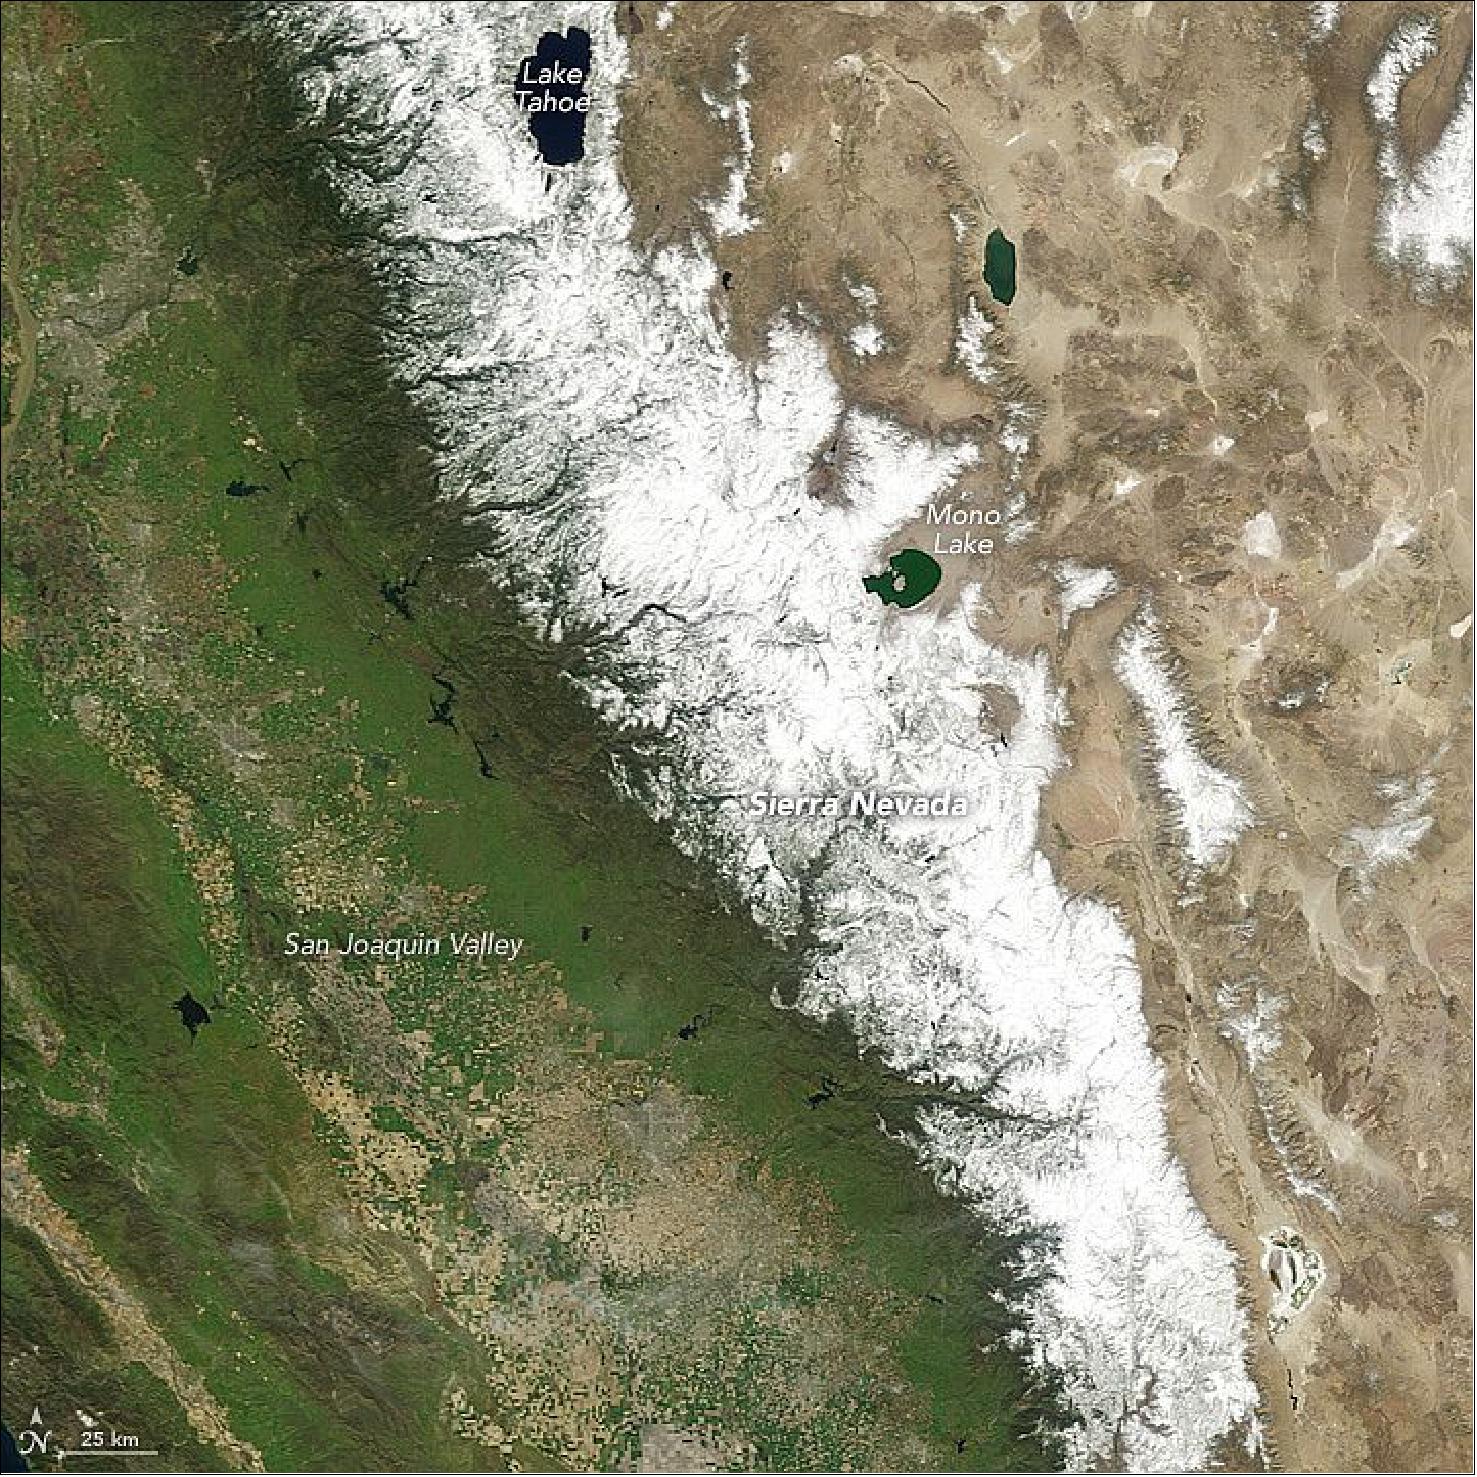 Figure 97: The snowpack on the Sierra Nevada amid the wet year of 2011, acquired by the MODIS instrument on Terra on March 31, 2011 (image credit: NASA, Earth Observatory, Jesse Allen)